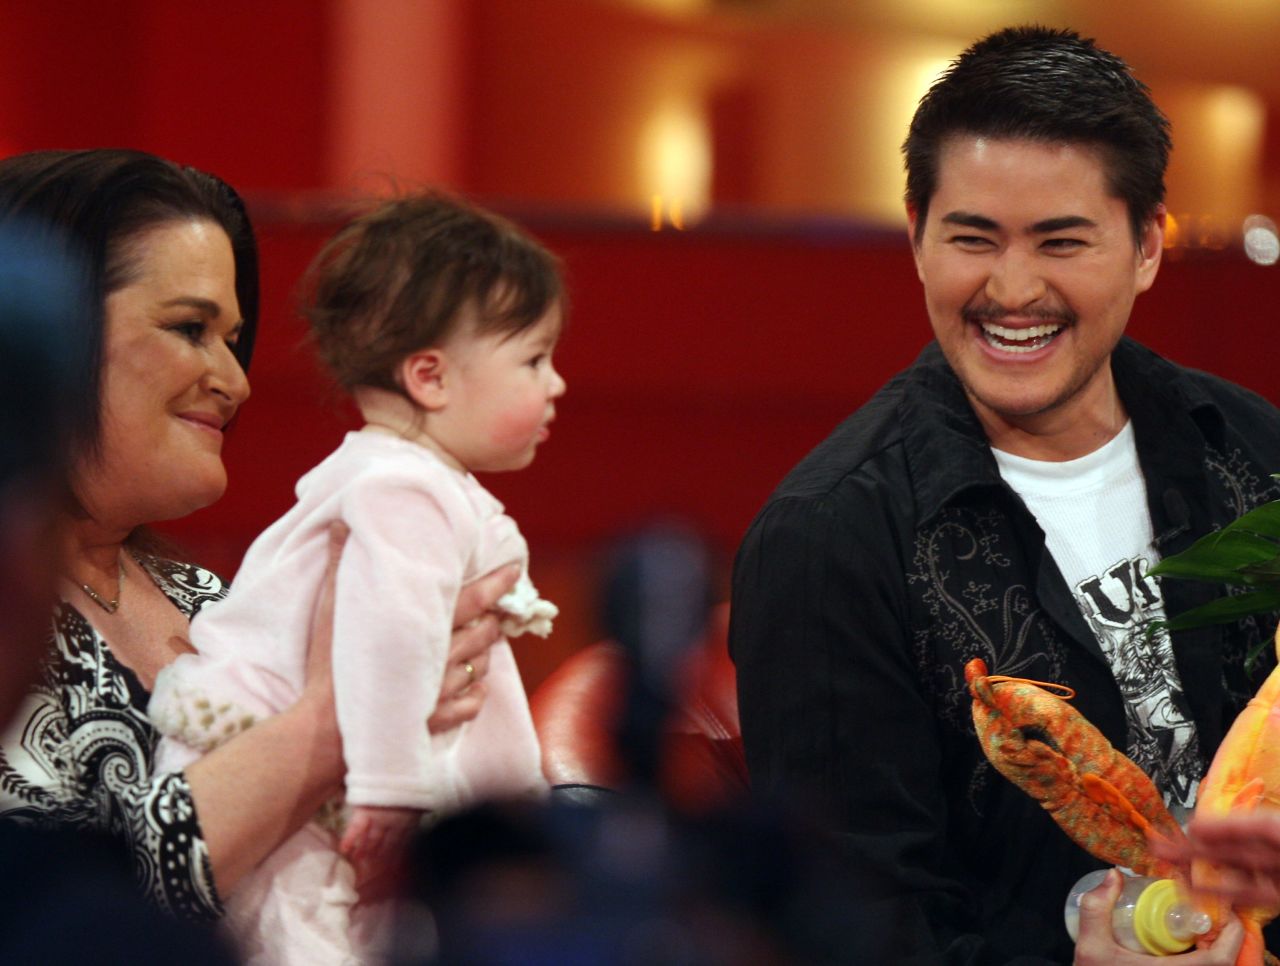 Thomas Beatie, right, made headlines as "the pregnant man" when he <a href="http://www.cnn.com/2008/US/11/18/lkl.beatie.qanda/">gave birth</a> to his daughter, Susan, in 2008. Beatie wrote a book about his experience called "Labor of Love: The Story of One Man's Extraordinary Pregnancy."